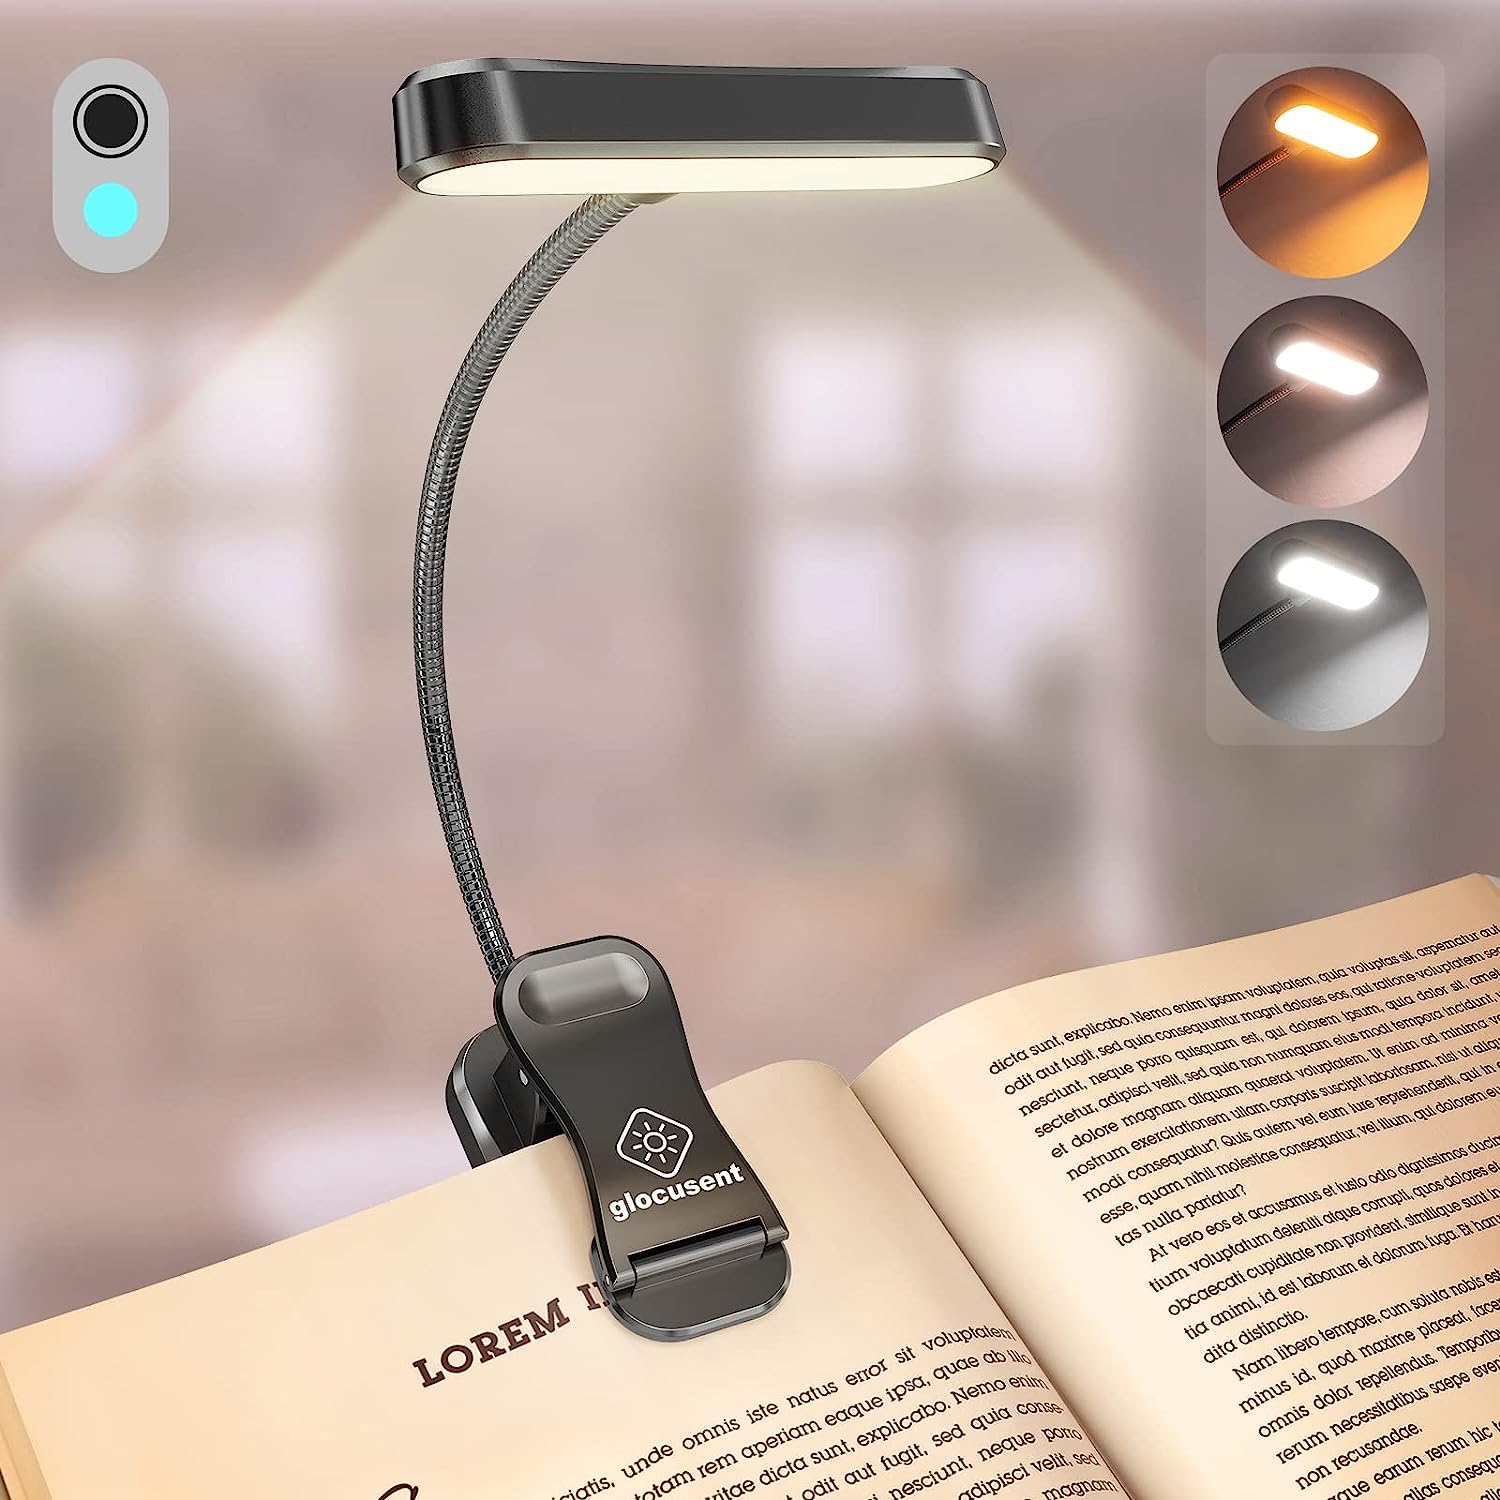 Reading Light, 9 LED Book Light with Touch Control, USB Rechargeable Reading  Light Clip on Book, 3 Brightness Modes (Warm & White LED), Flexible Book  Clamp Light for Bed, Tablet, E-Reader 